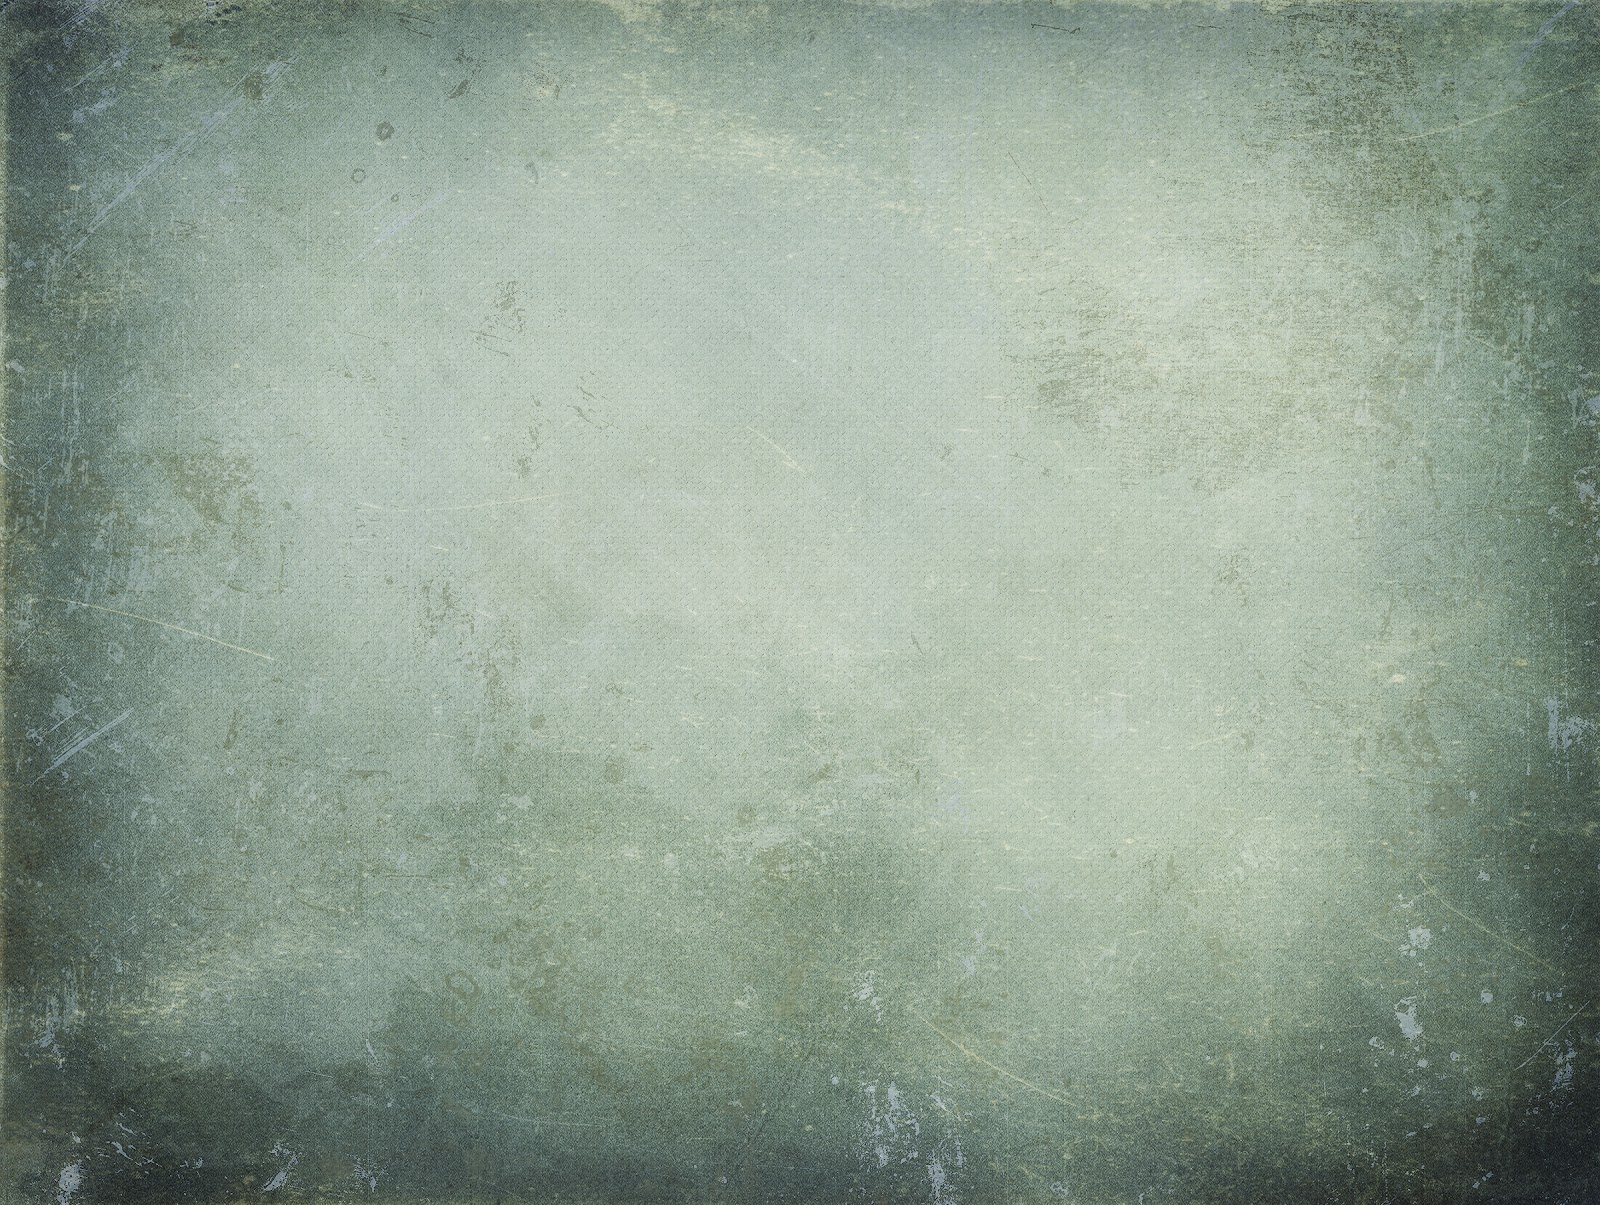 Shadowhouse Creations: Used Canvas Texture Set and Sample Image